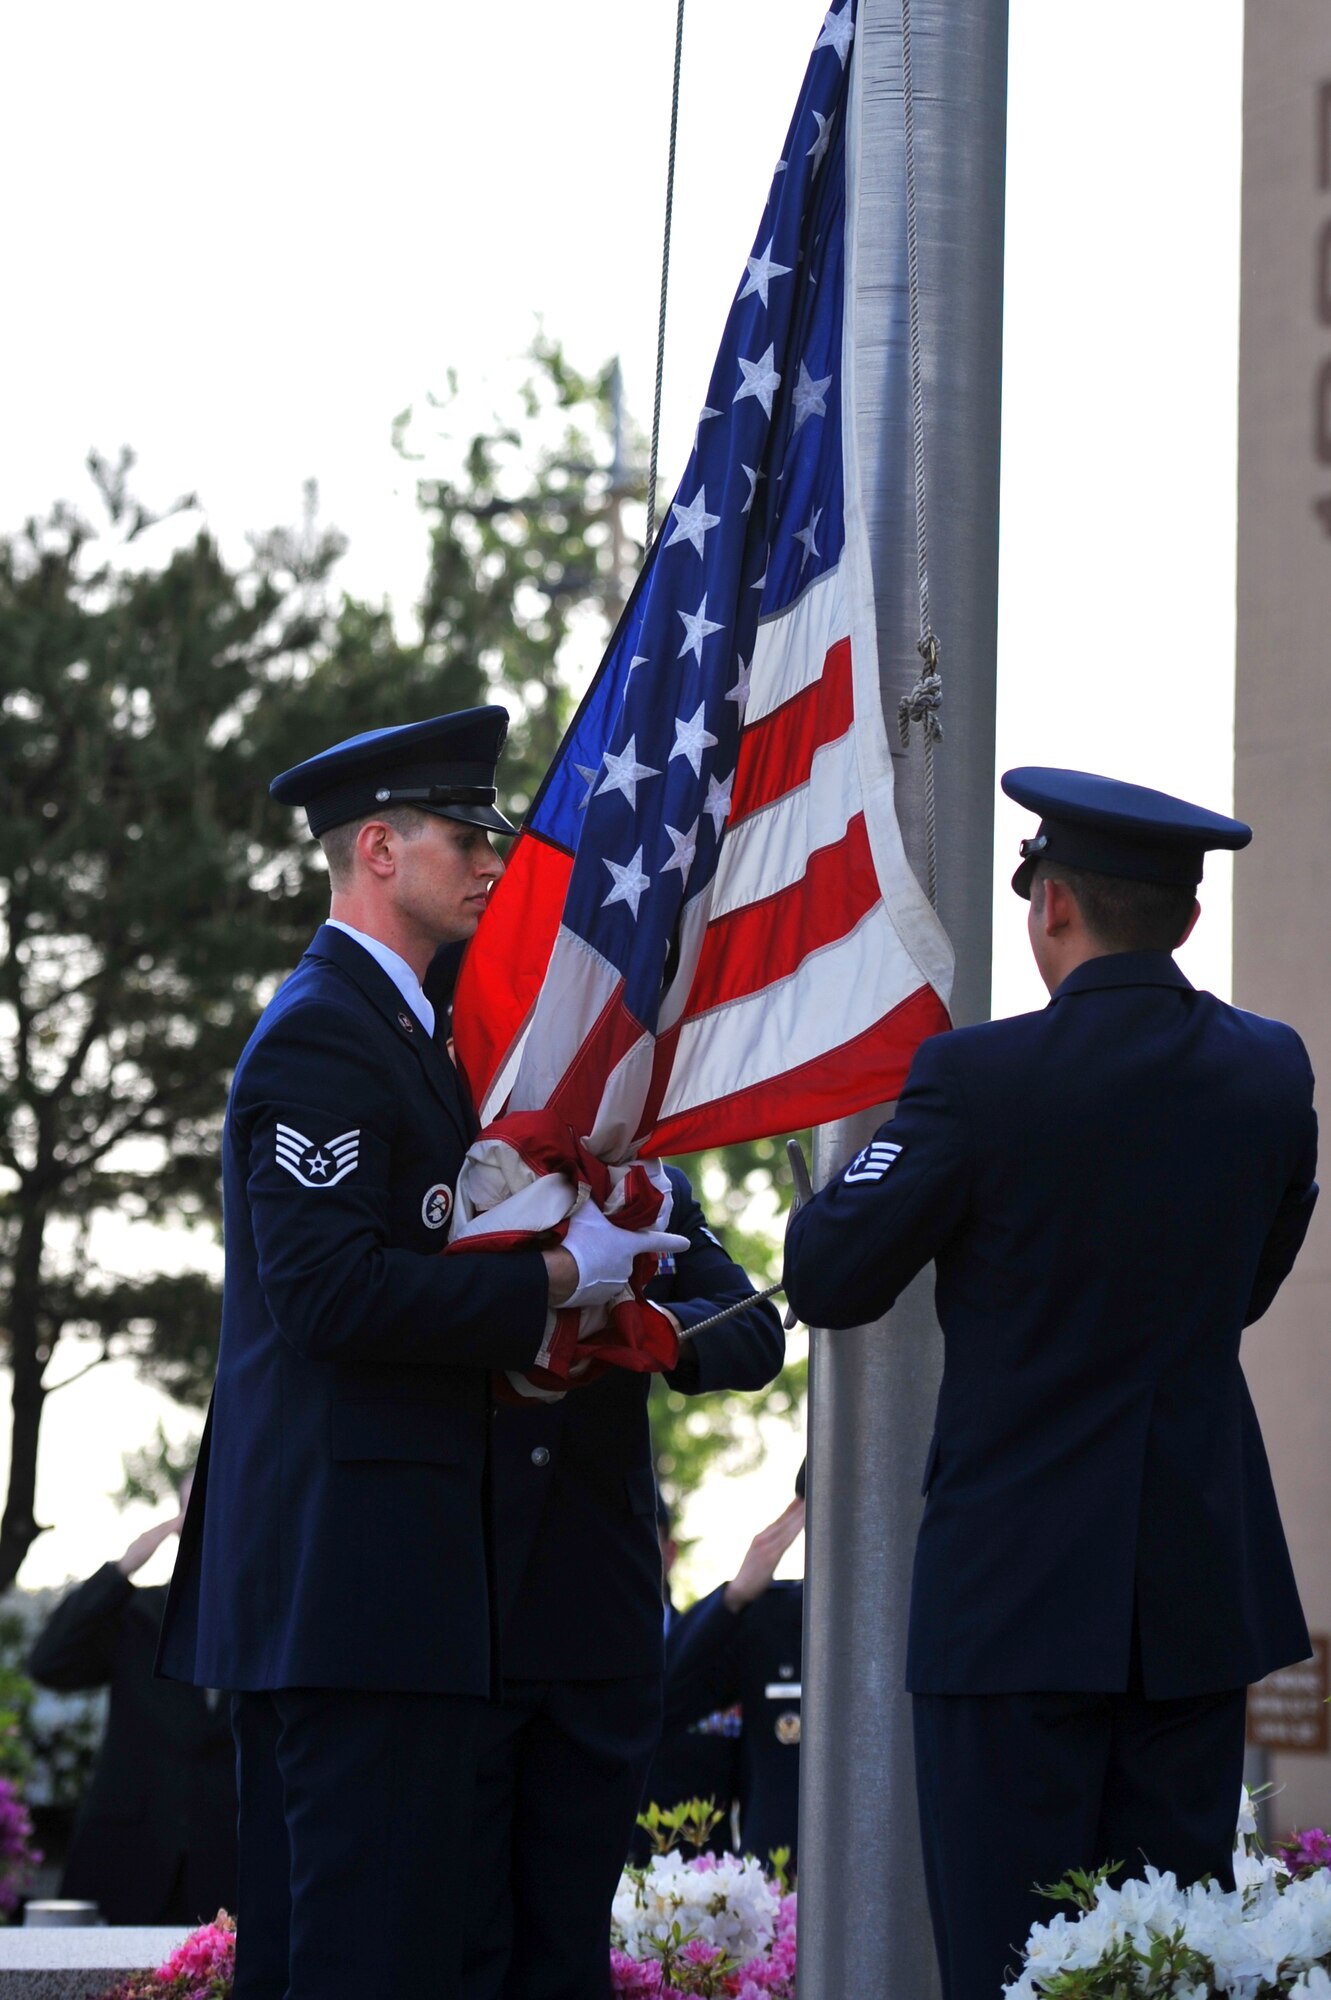 Osan Honor Guard members bring down the flag during a retreat ceremony at Osan Air Base, Republic of Korea, May 13, 2013. The ceremony kicked off an annual week-long observance that highlights some of the skills and capabilities of the 51st Security Forces and Office of Special Investigations units here. (U.S. Air Force photo/Staff Sgt. Emerson Nuñez)